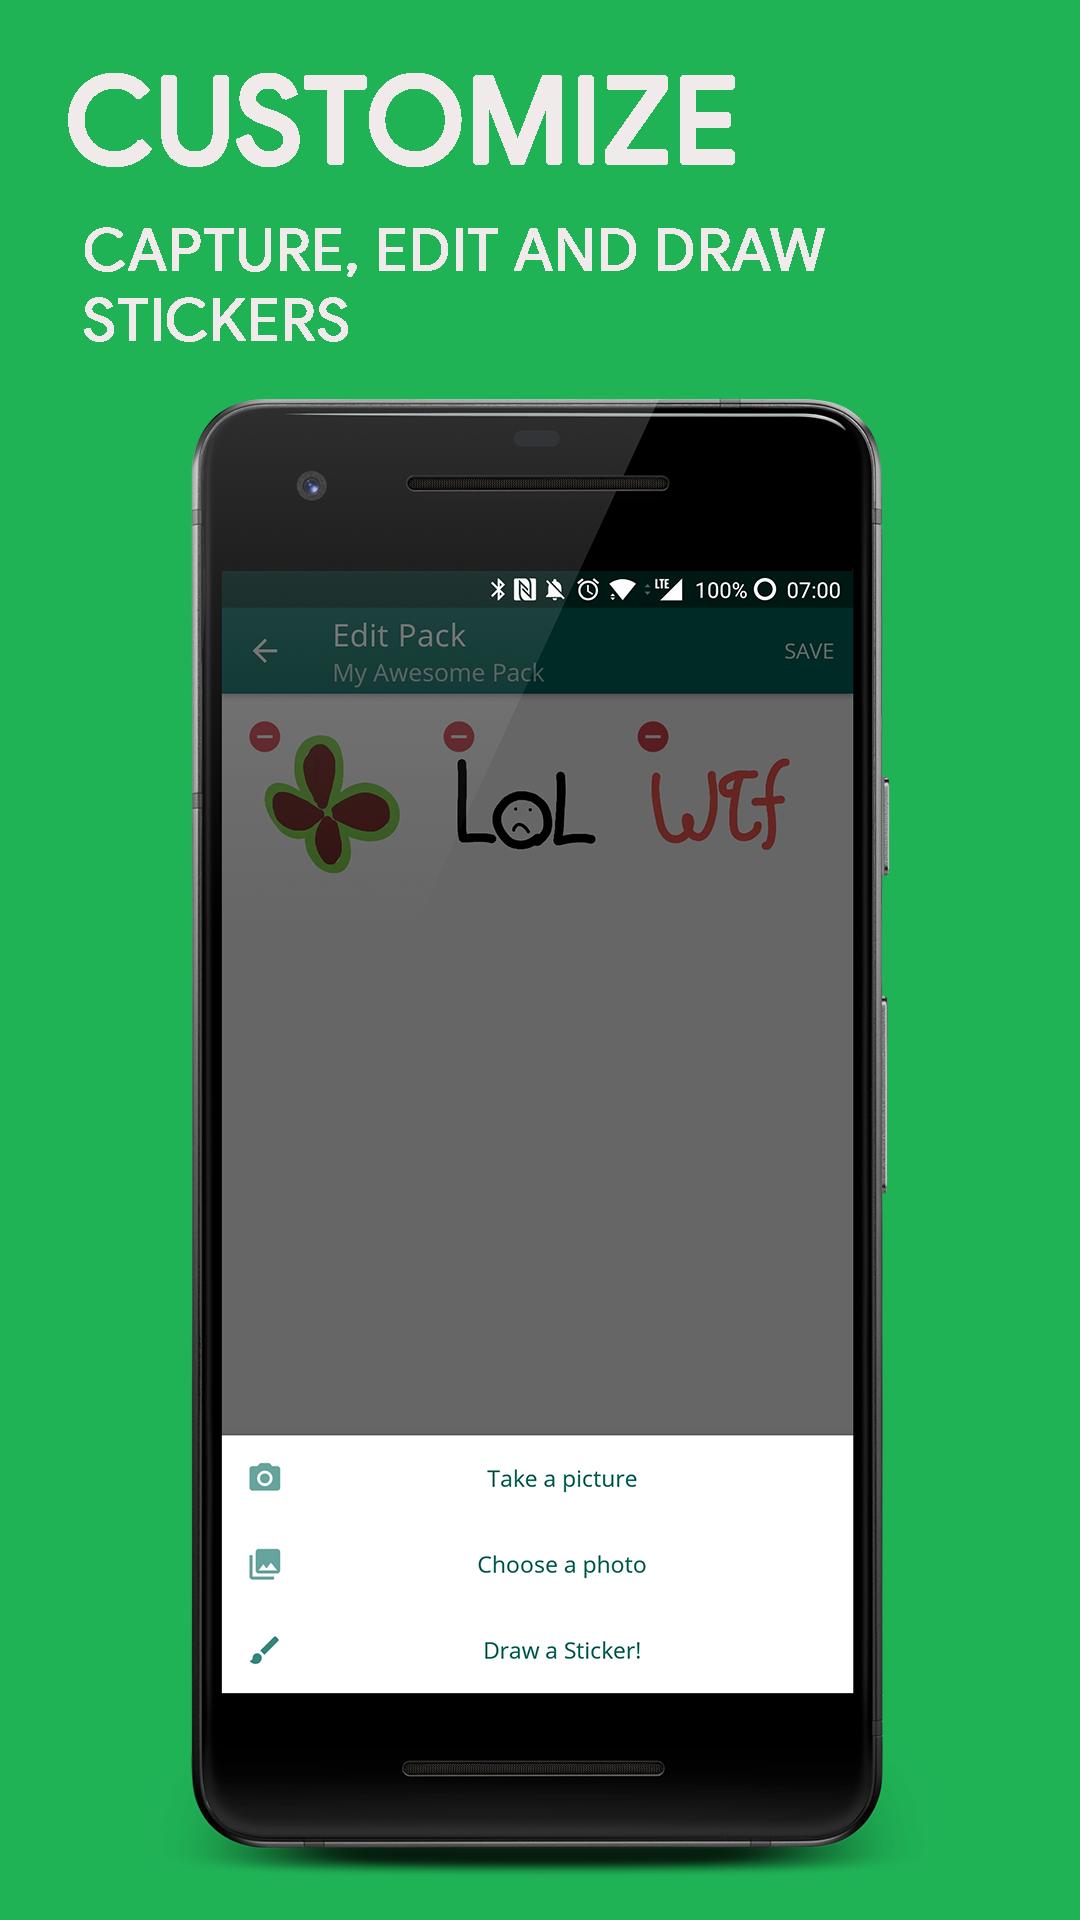 Stickerly Sticker Maker For Whatsapp For Android Apk Download